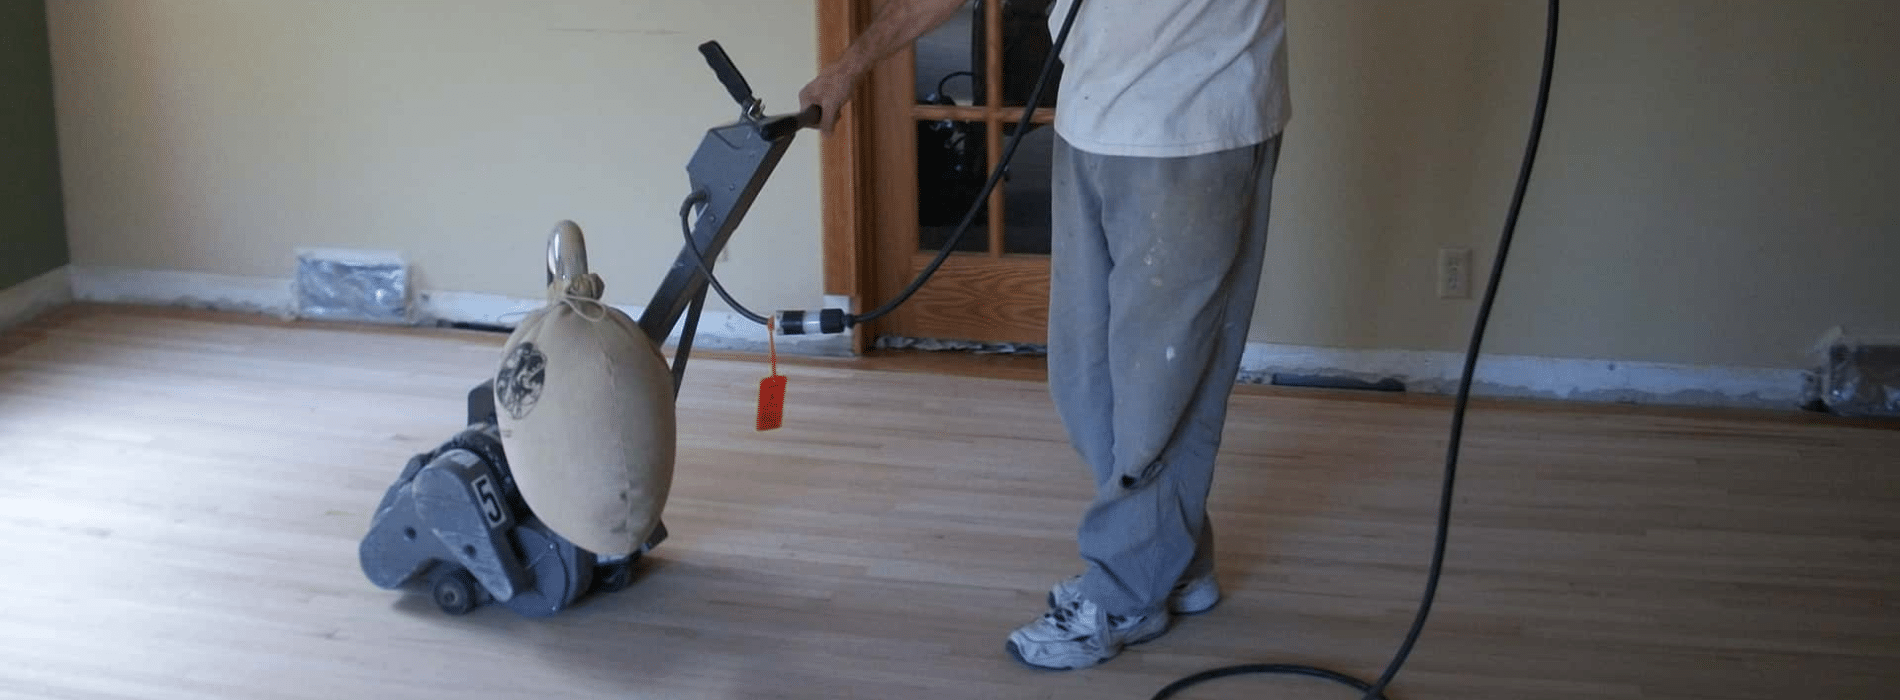 Mr Sander® operating a 2.2 kW, 220V, 60Hz Bona belt sander on a parquet floor in Blackheath, SE3. The image highlights the HEPA-filtered dust extraction system, promising a clean, efficient restoration with remarkable sanding outcomes and minimal dust.